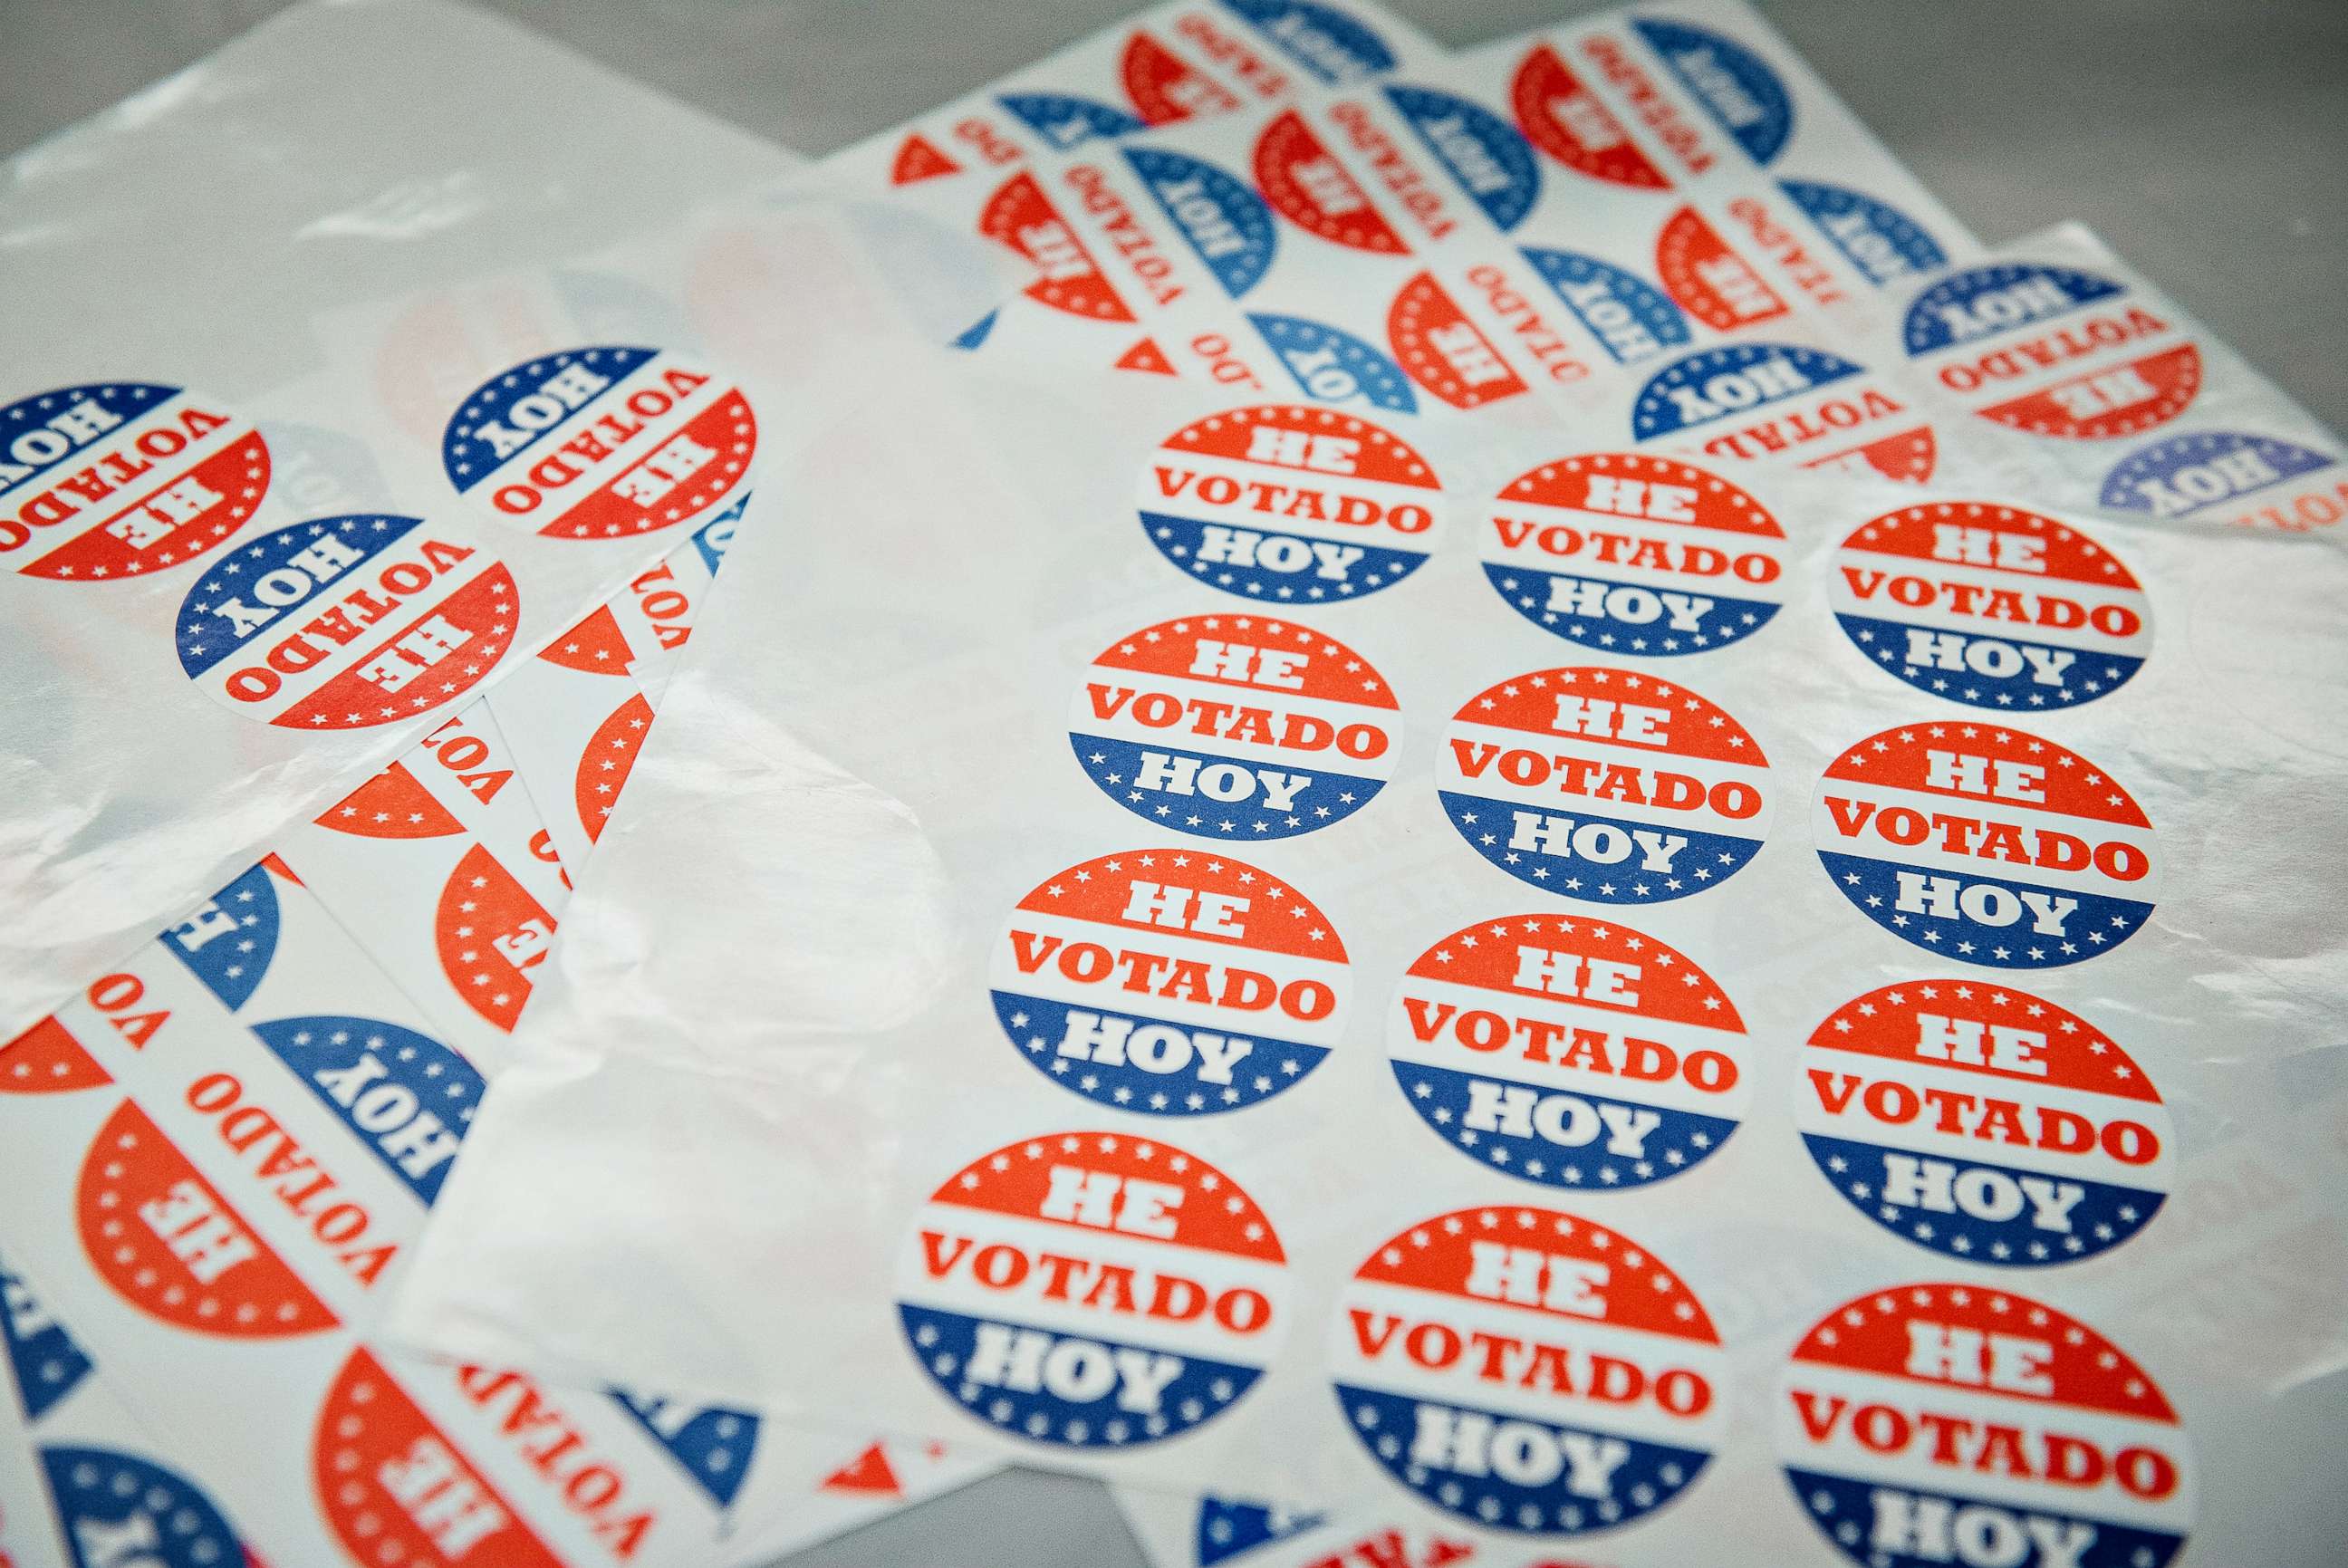 PHOTO: Sheets of stickers reading "I Voted Today" in Spanish are displayed on a table at a polling station inside a Baptist Church in Philadelphia, Penn., June 2, 2020.